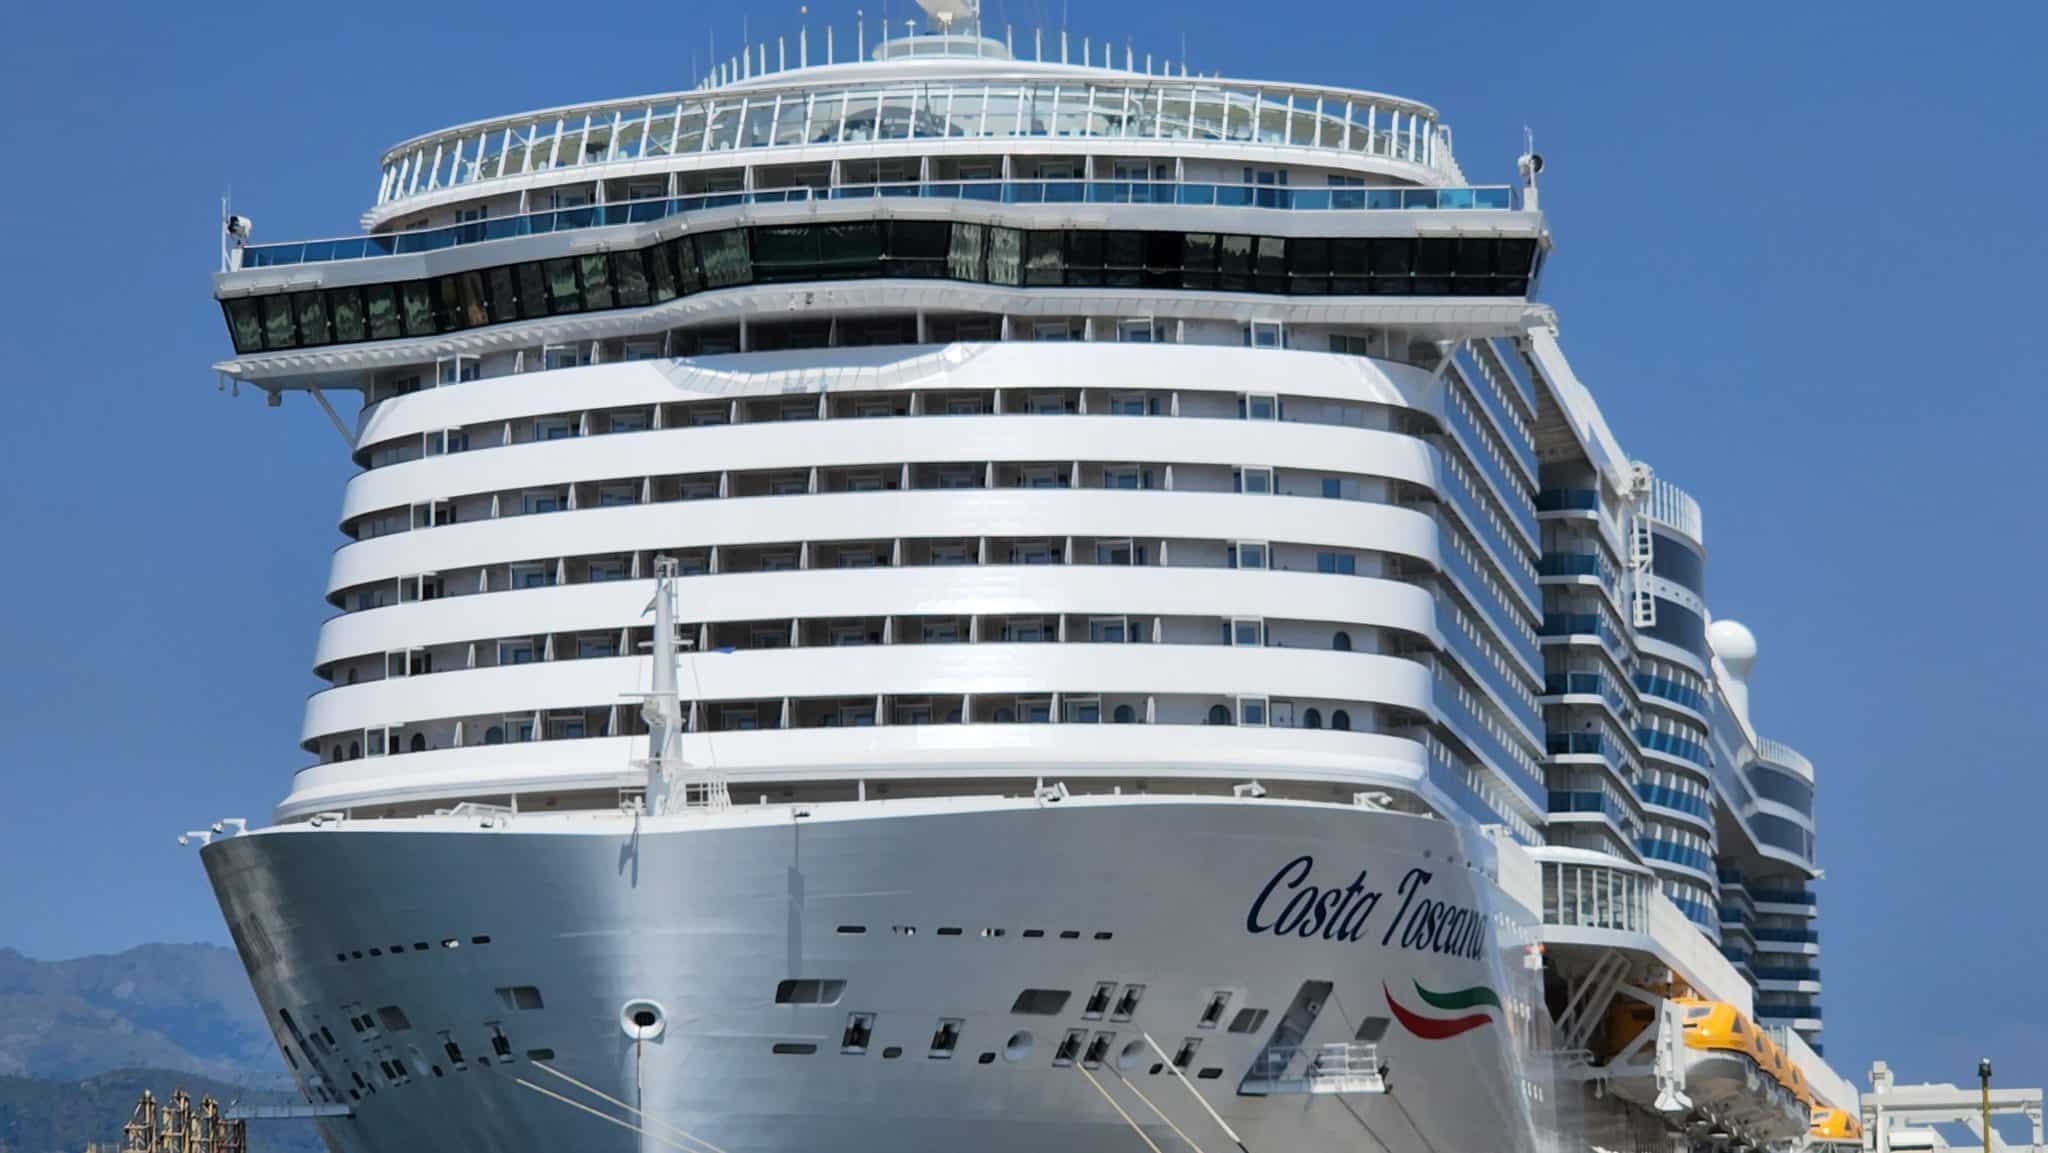 Costa Toscana, one of the world's top 10 largest cruise ships